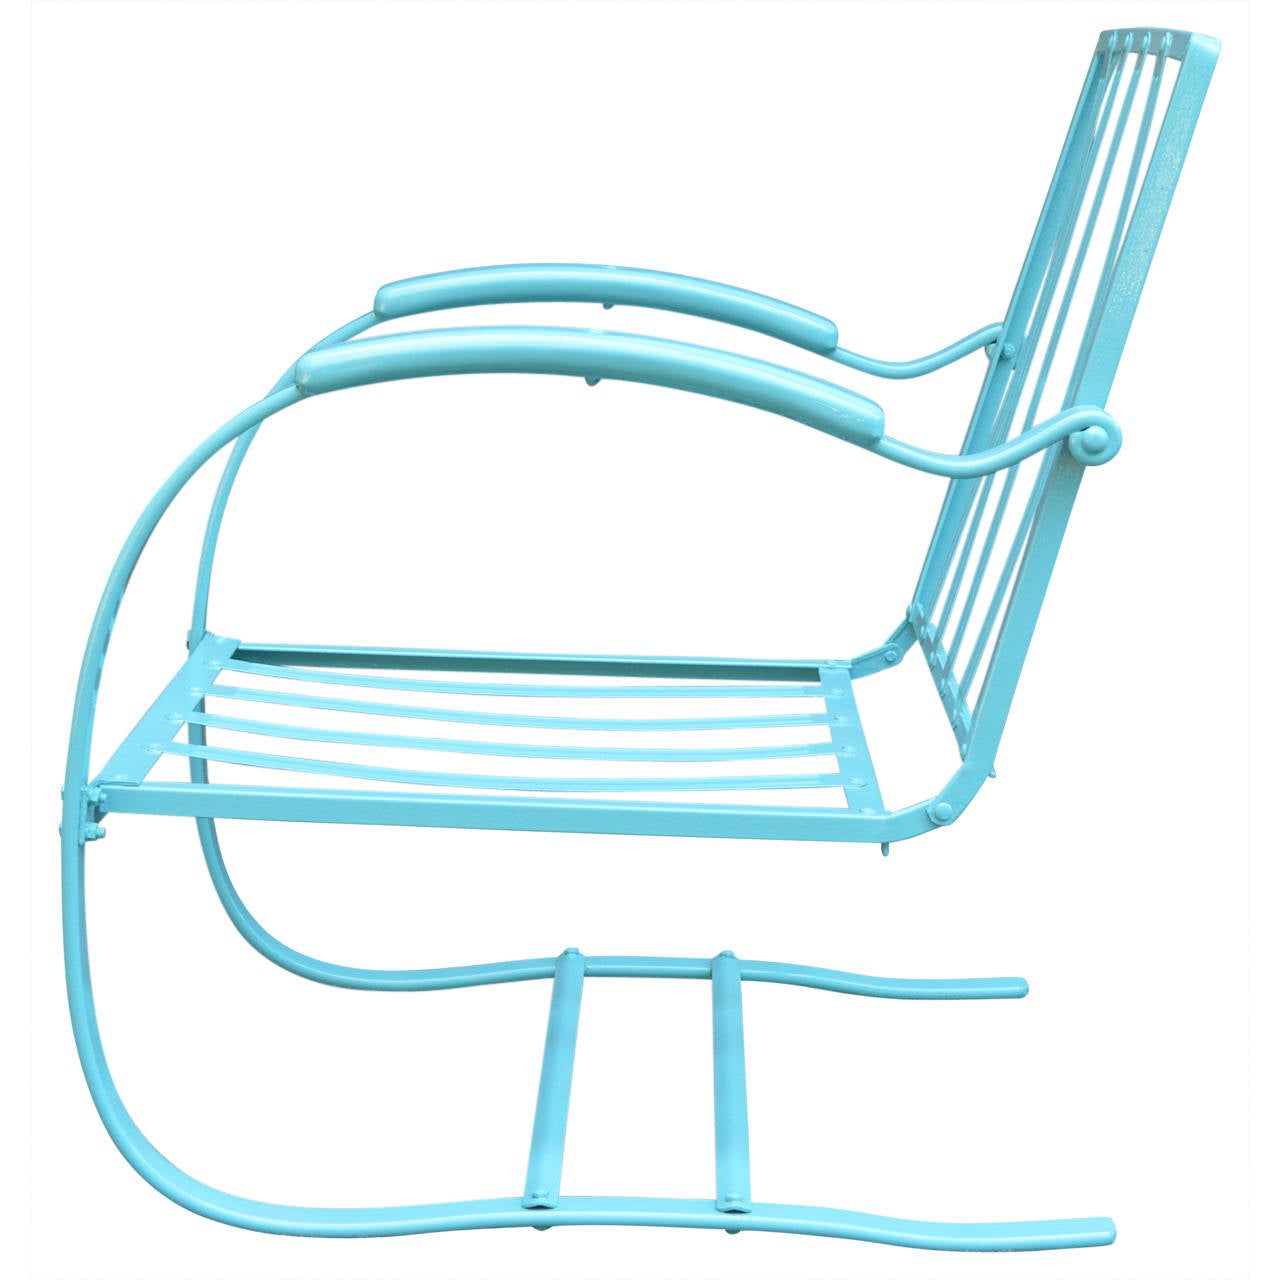 Powder-Coated Set of Three Metal Patio Chairs